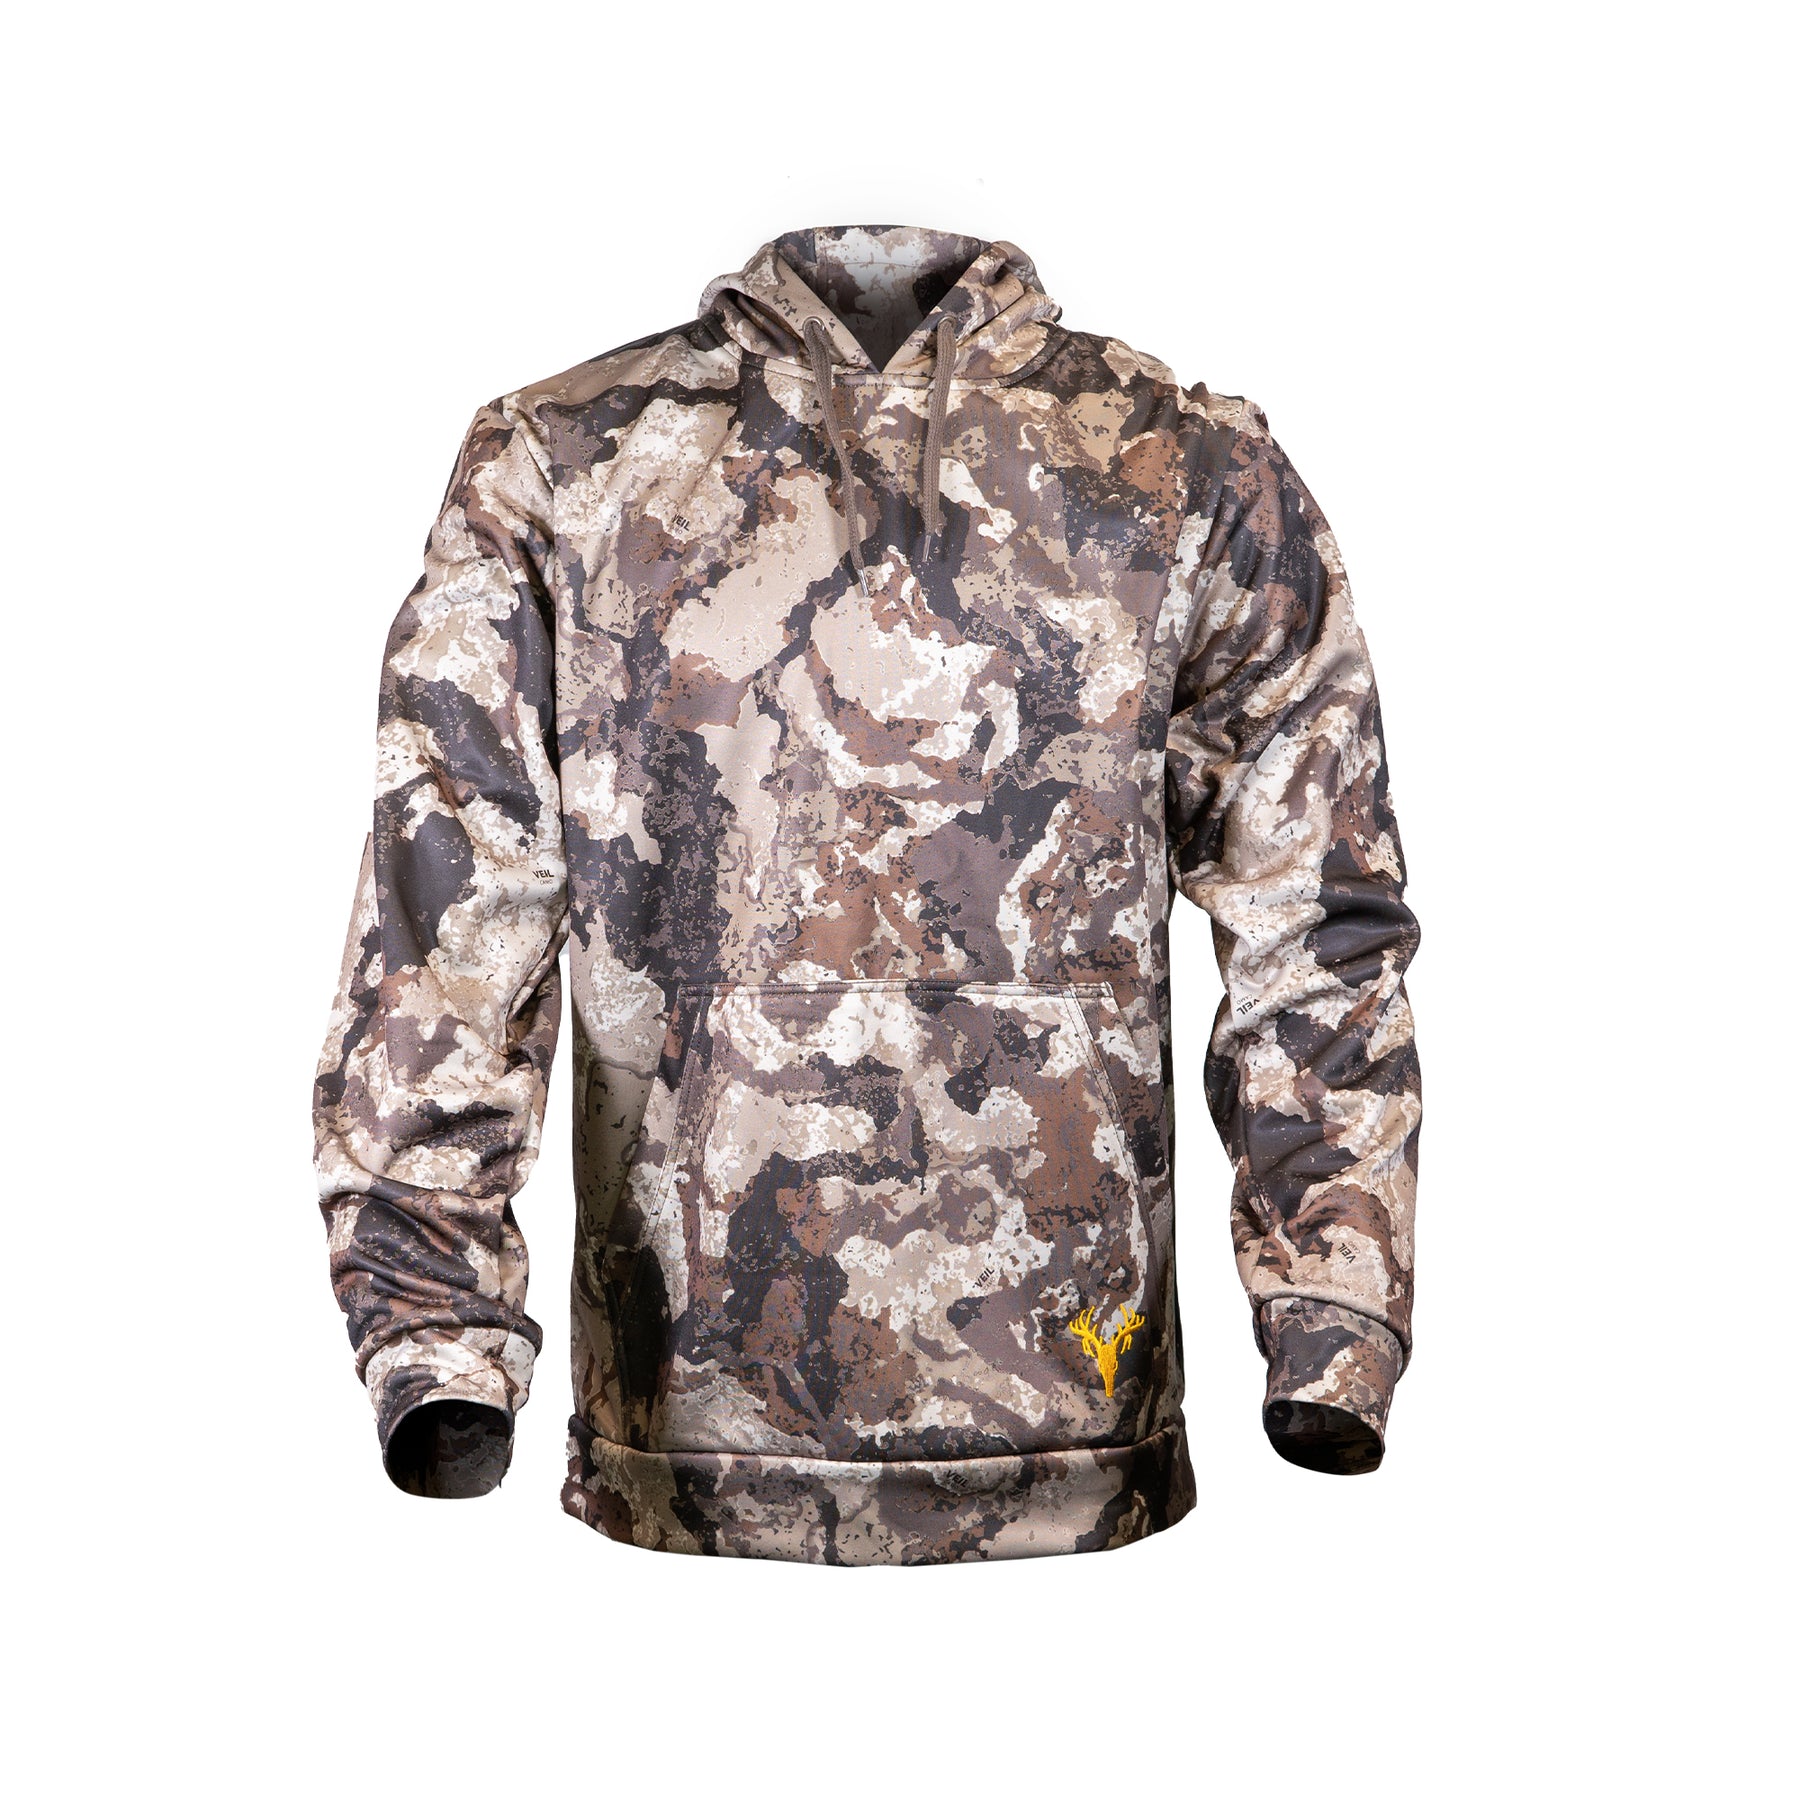 Hunting Apparel, Camo Hunting Clothes, Ghillie Suit, Camo Jacket, Pants –  Hot Shot Gear